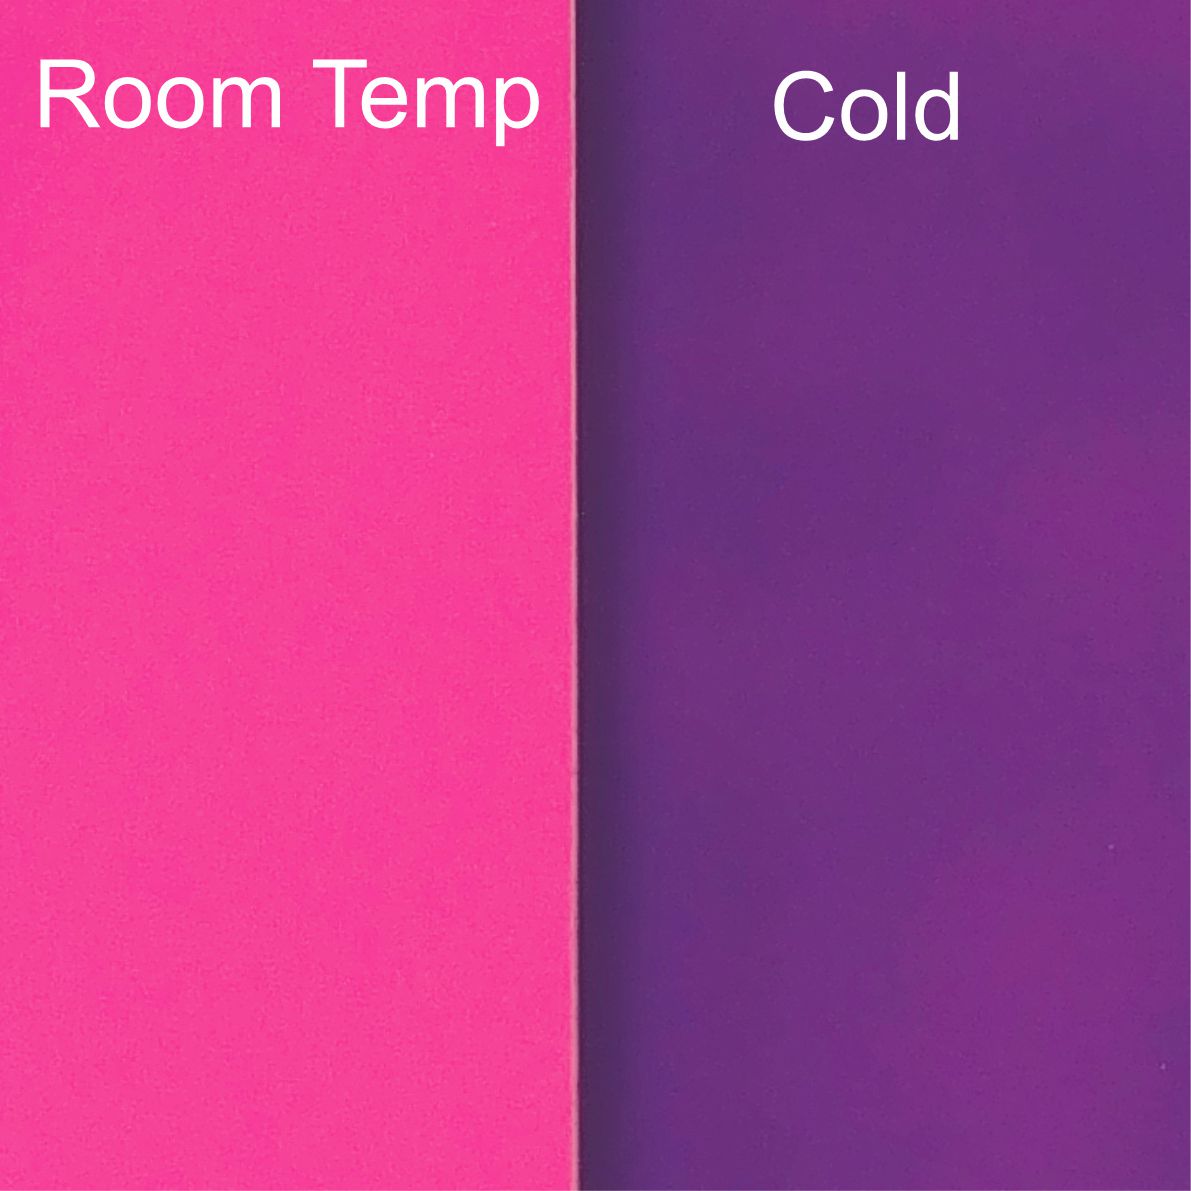 Color Changing Vinyl - Cold Pink/Purple - 12x12 Sheet - Expressions Vinyl